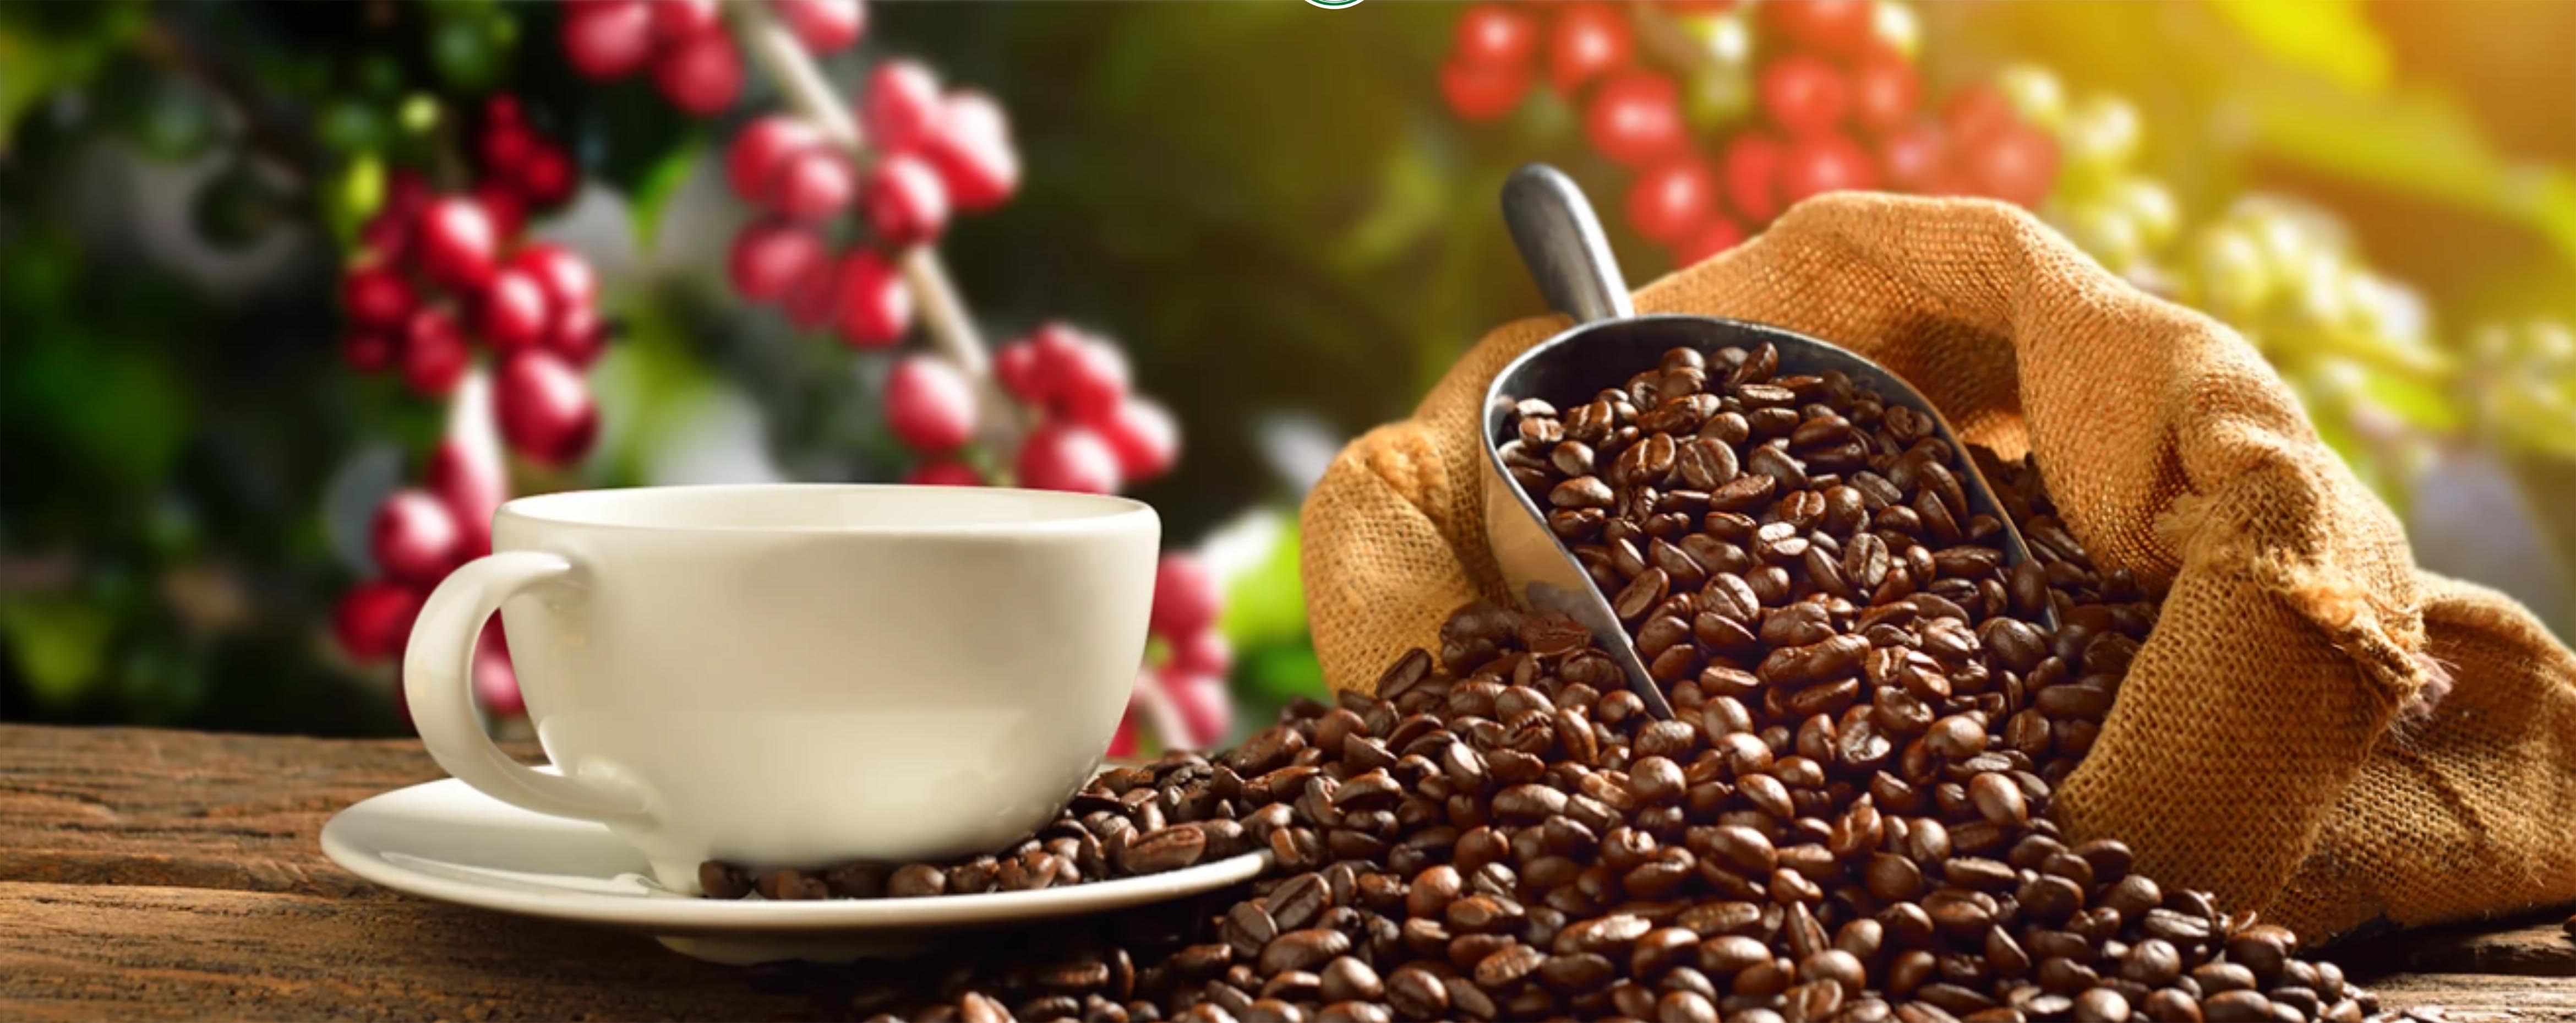 What trends offer opportunities or risks in the European coffee market?